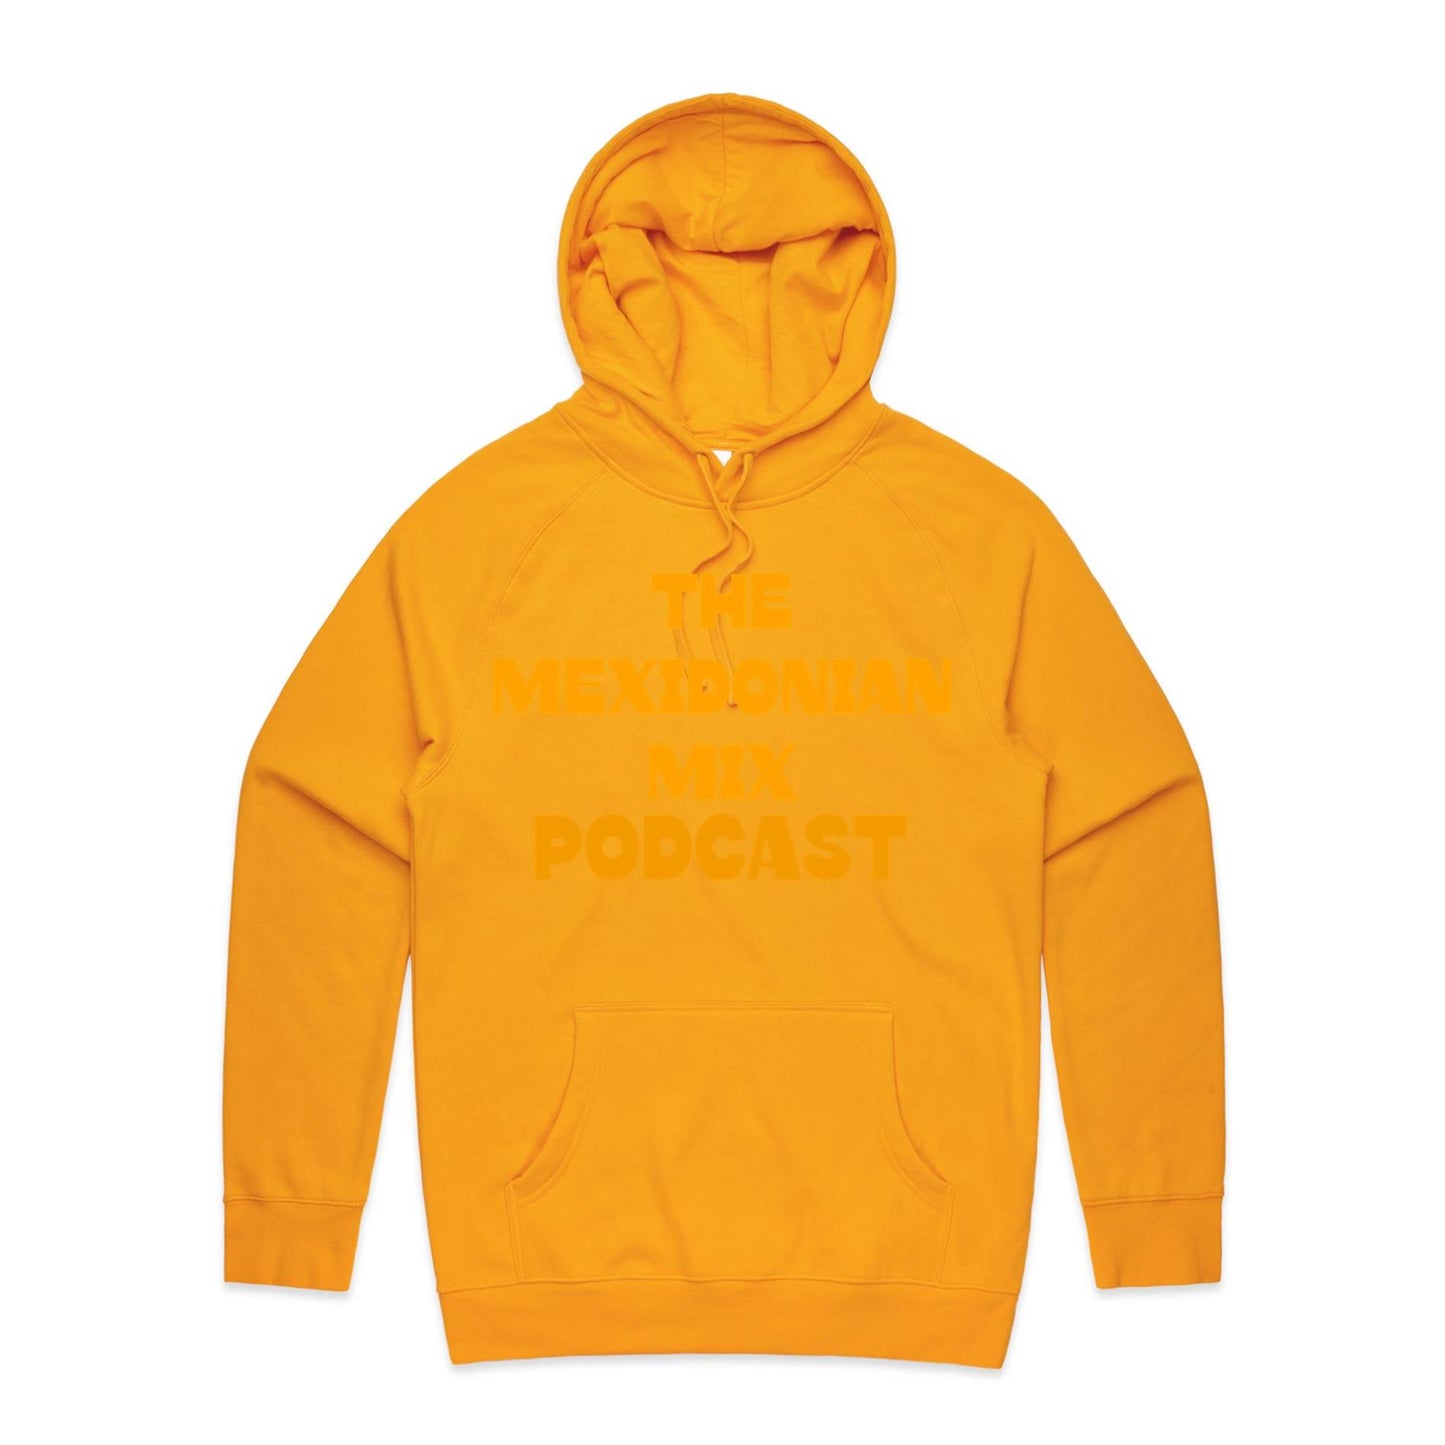 The Mexidonian Mix Podcast Hoodie - AS Colour - Supply Hood